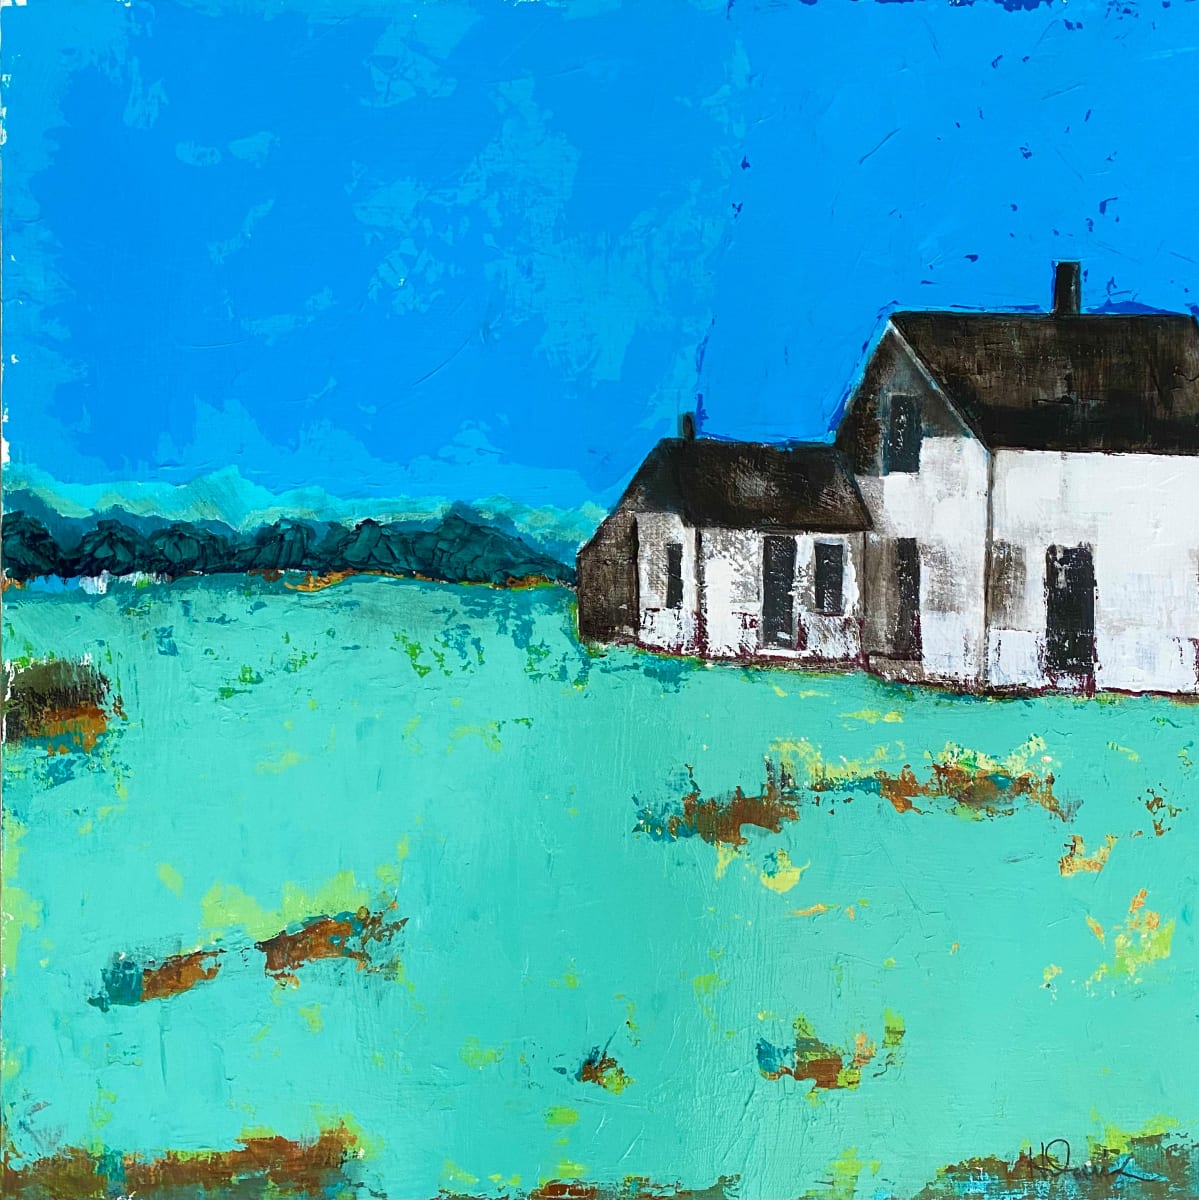 Abandoned Farmhouse by Heather Duris  Image: Weathered old farmhouse sits in a brightly colored landscape.